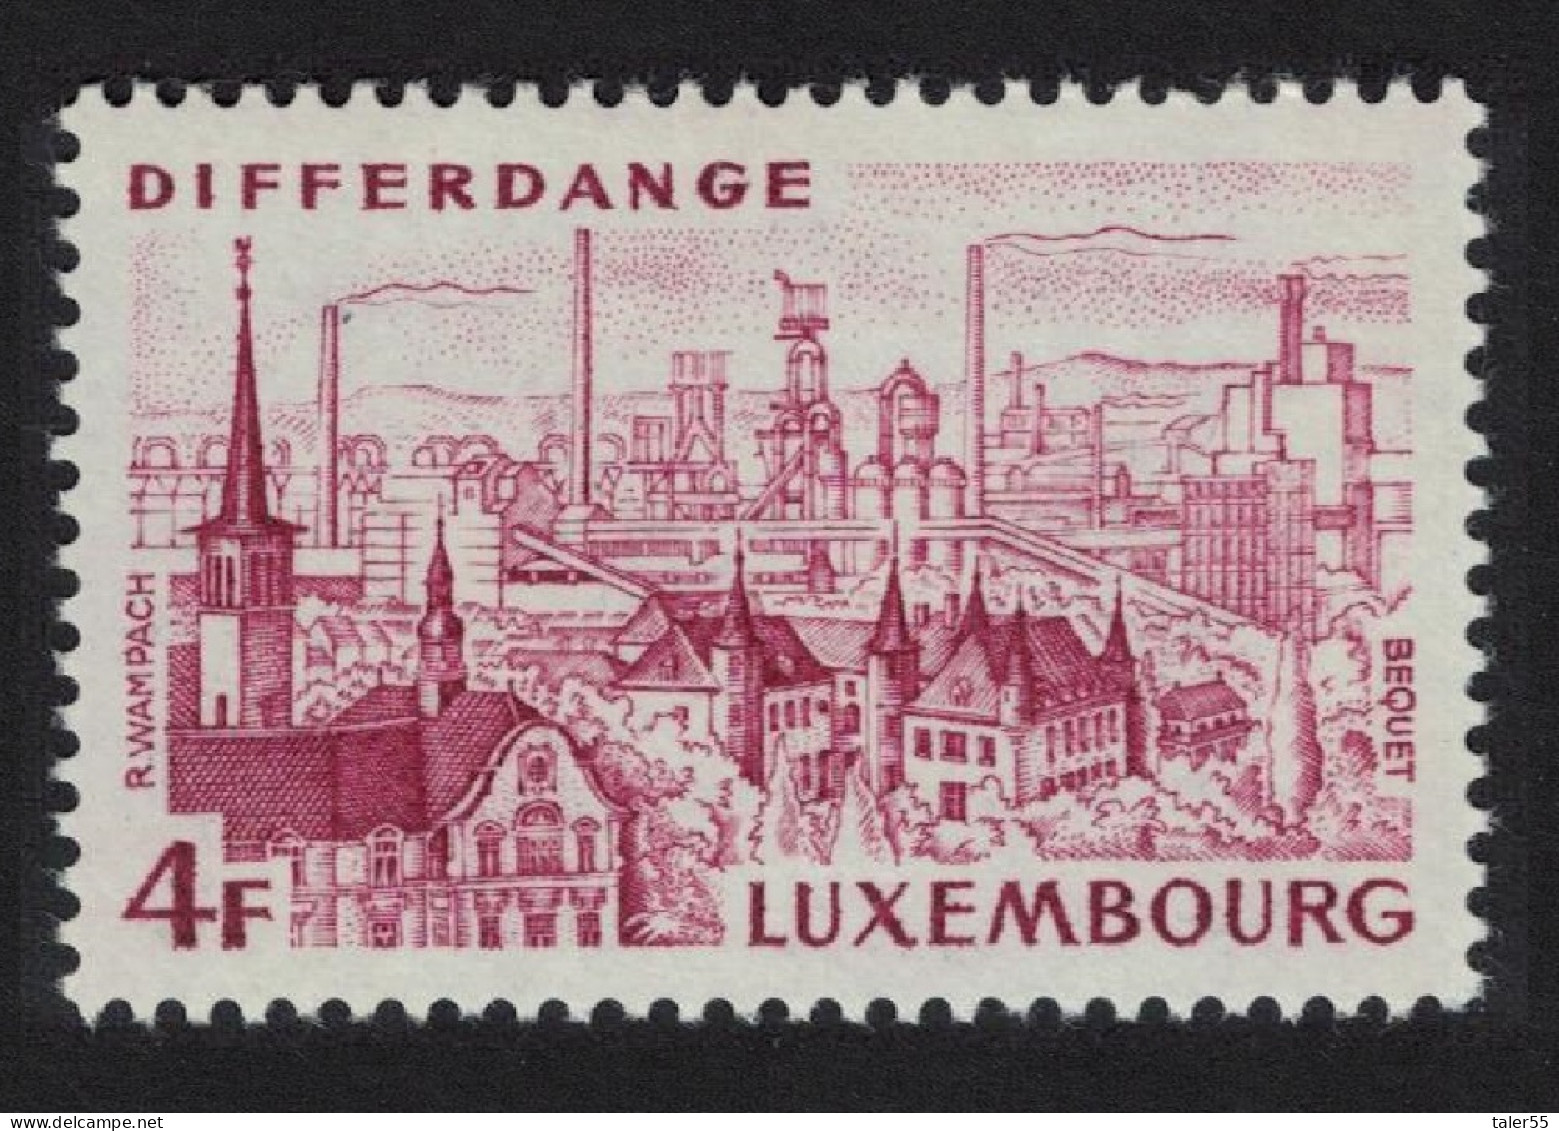 Luxembourg Tourism Differdange 1974 MNH SG#936 MI#892 - Unused Stamps